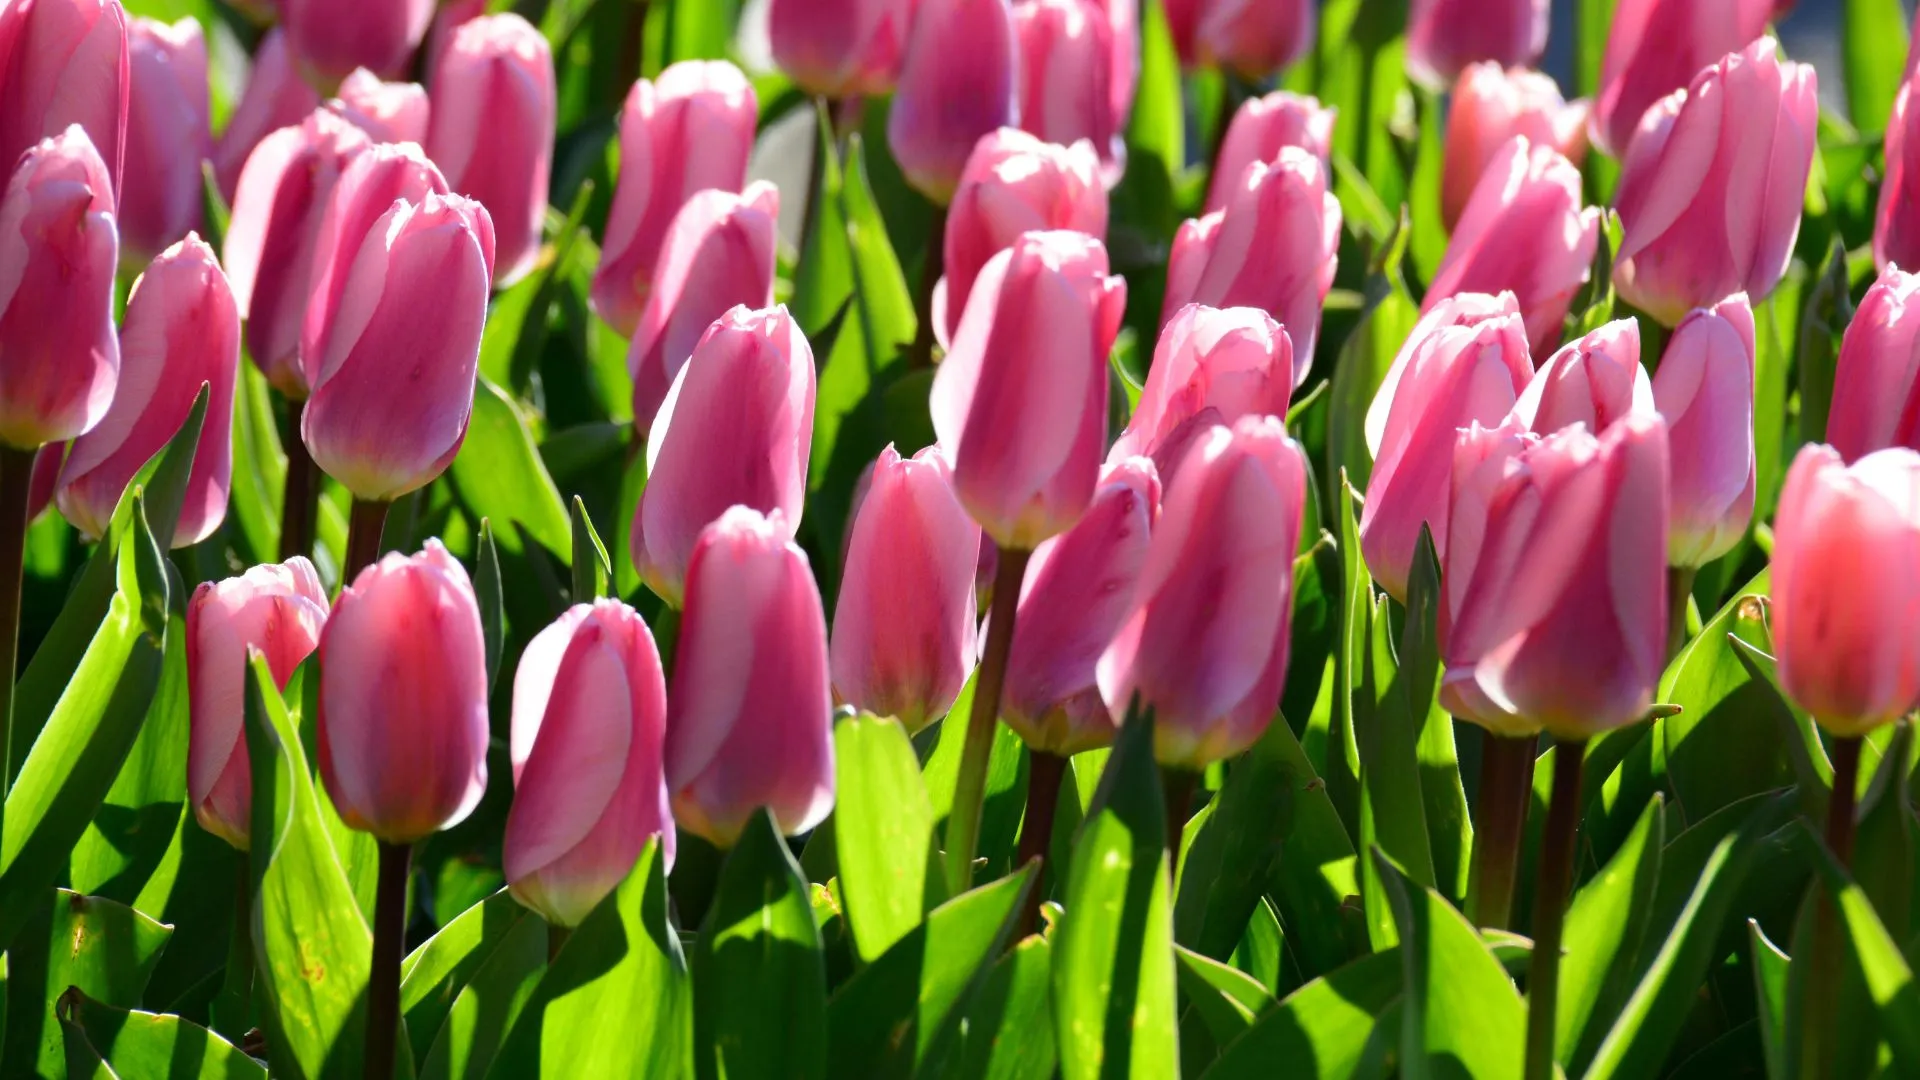 A cluster of pink tulips